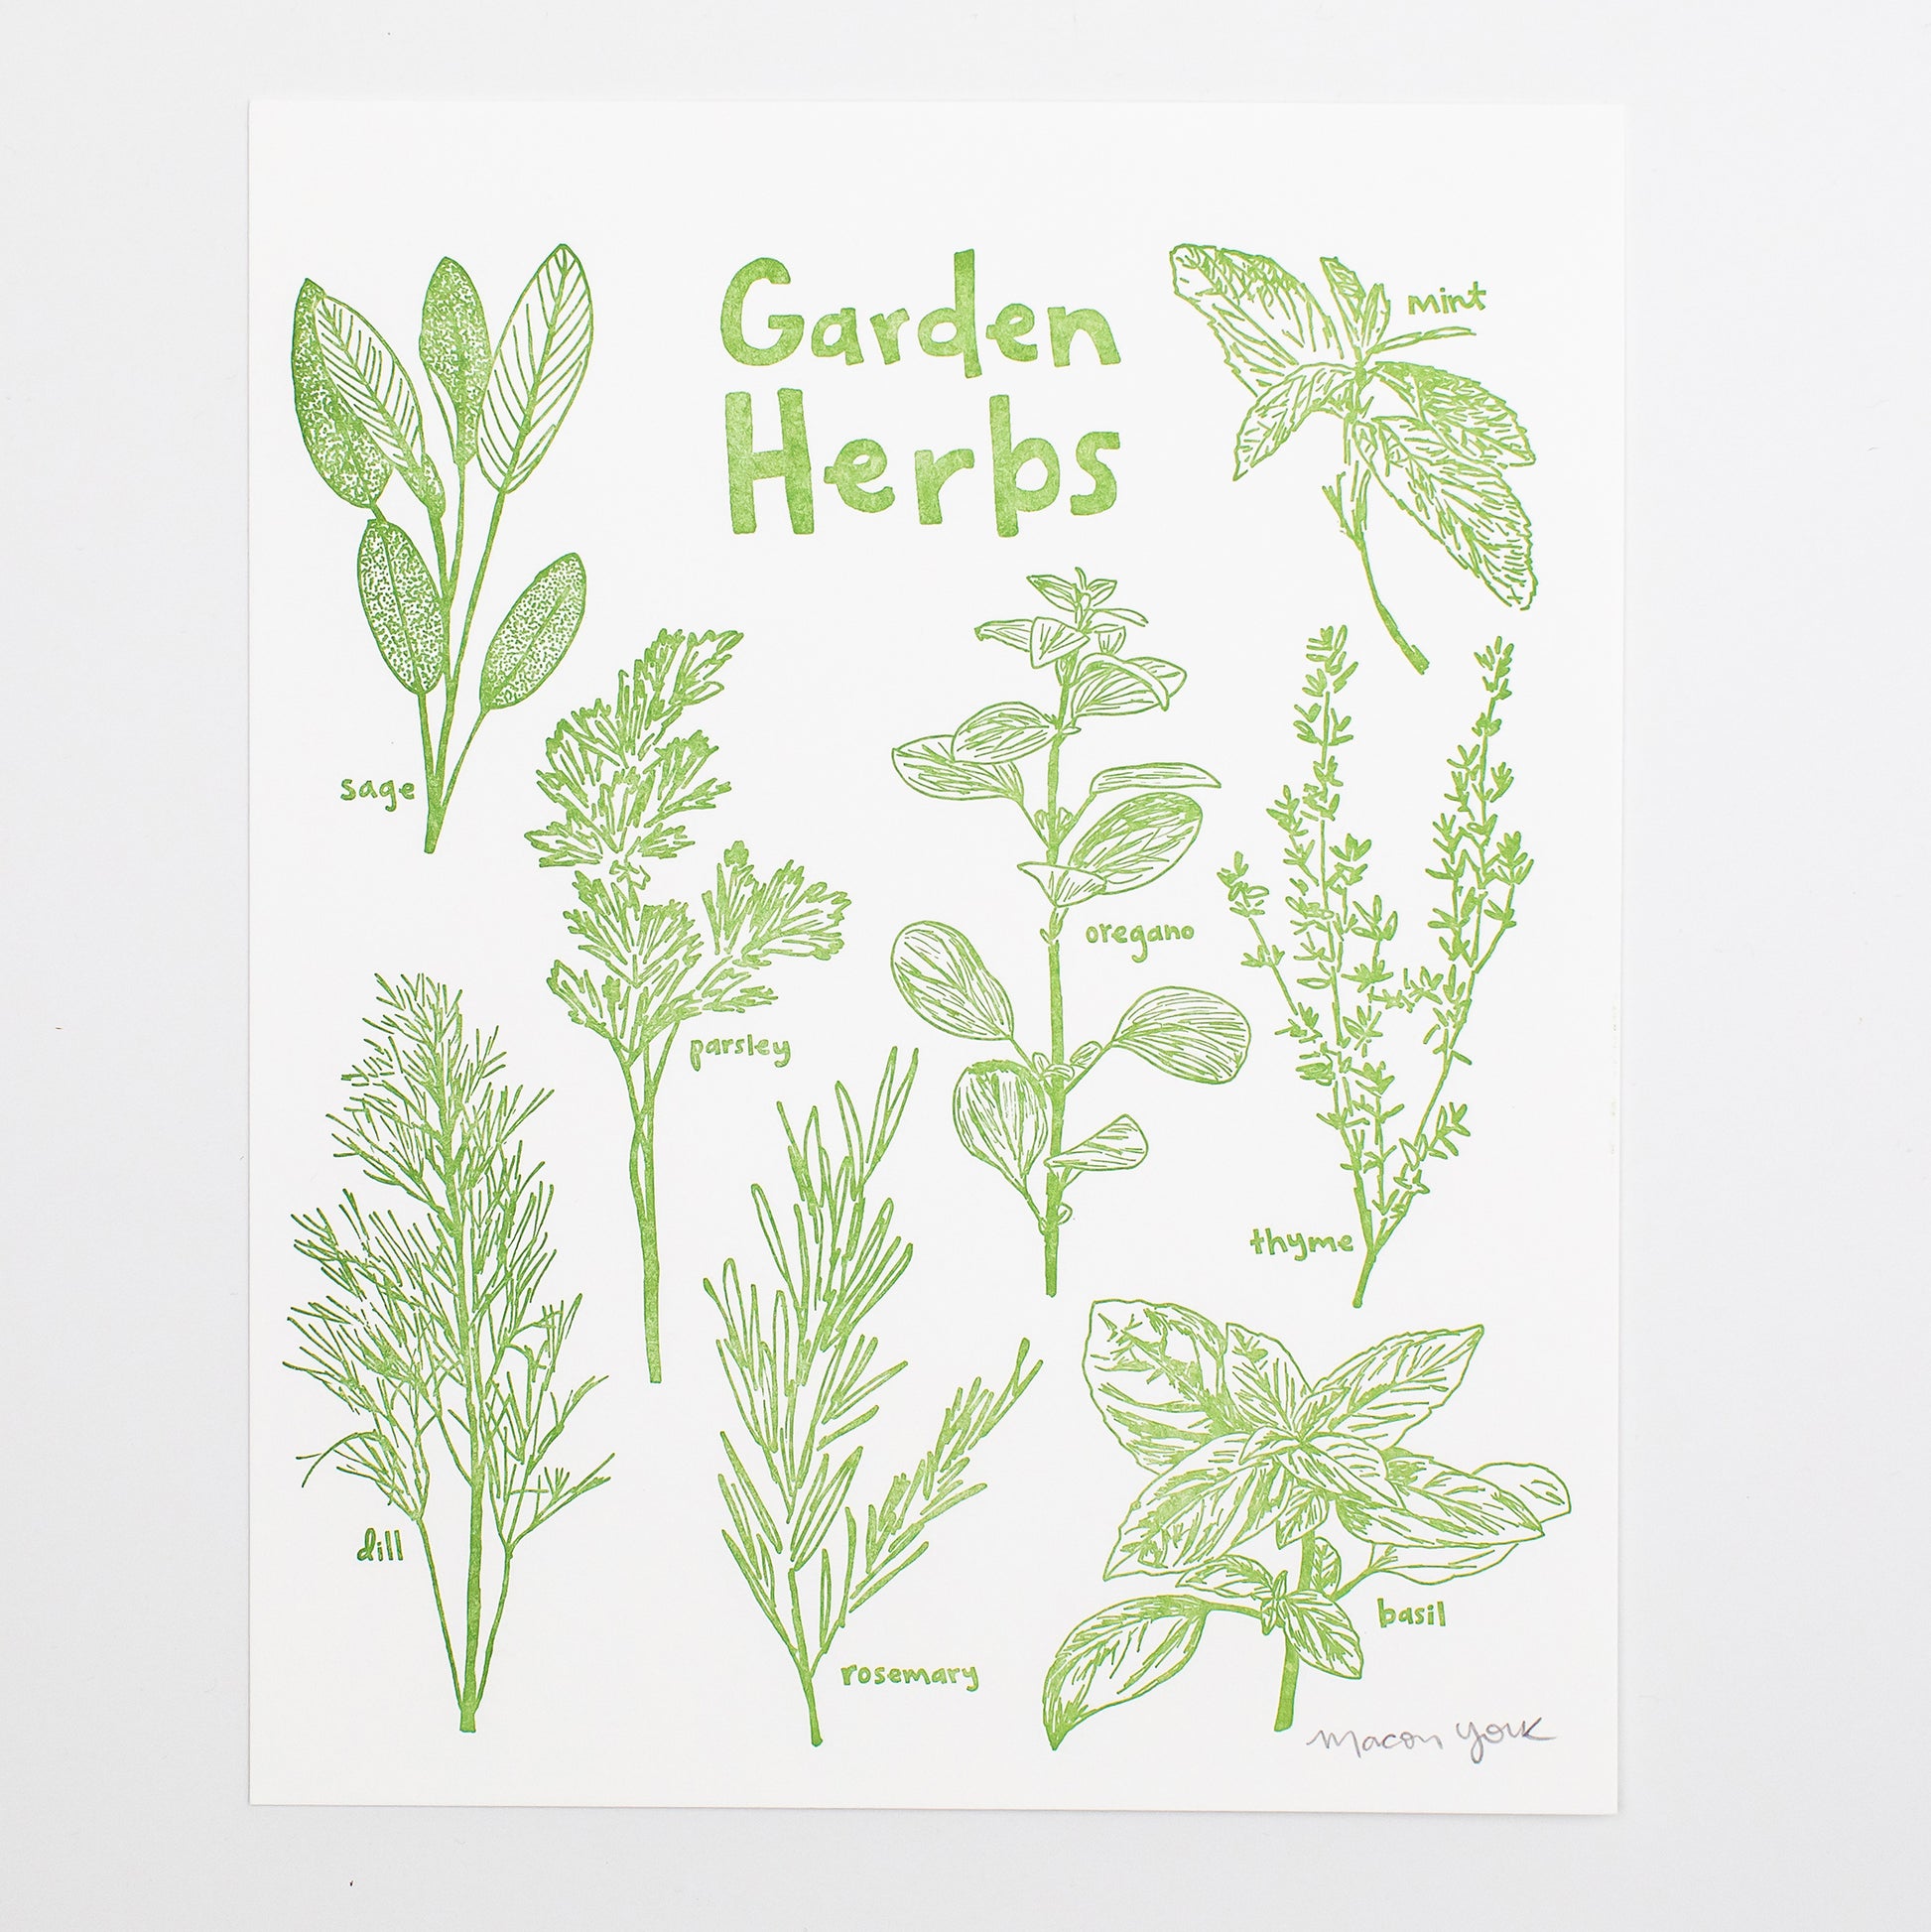 8x10 Letterpress art print featuring original whimsical illustrations of sage, mint, oregano, parsley, thyme, dill, basil, and rosemary. Each plant is labeled in hand-drawn typography. The herbs are letterpress printed on 100% cotton paper in a vibrant sage-green ink. 